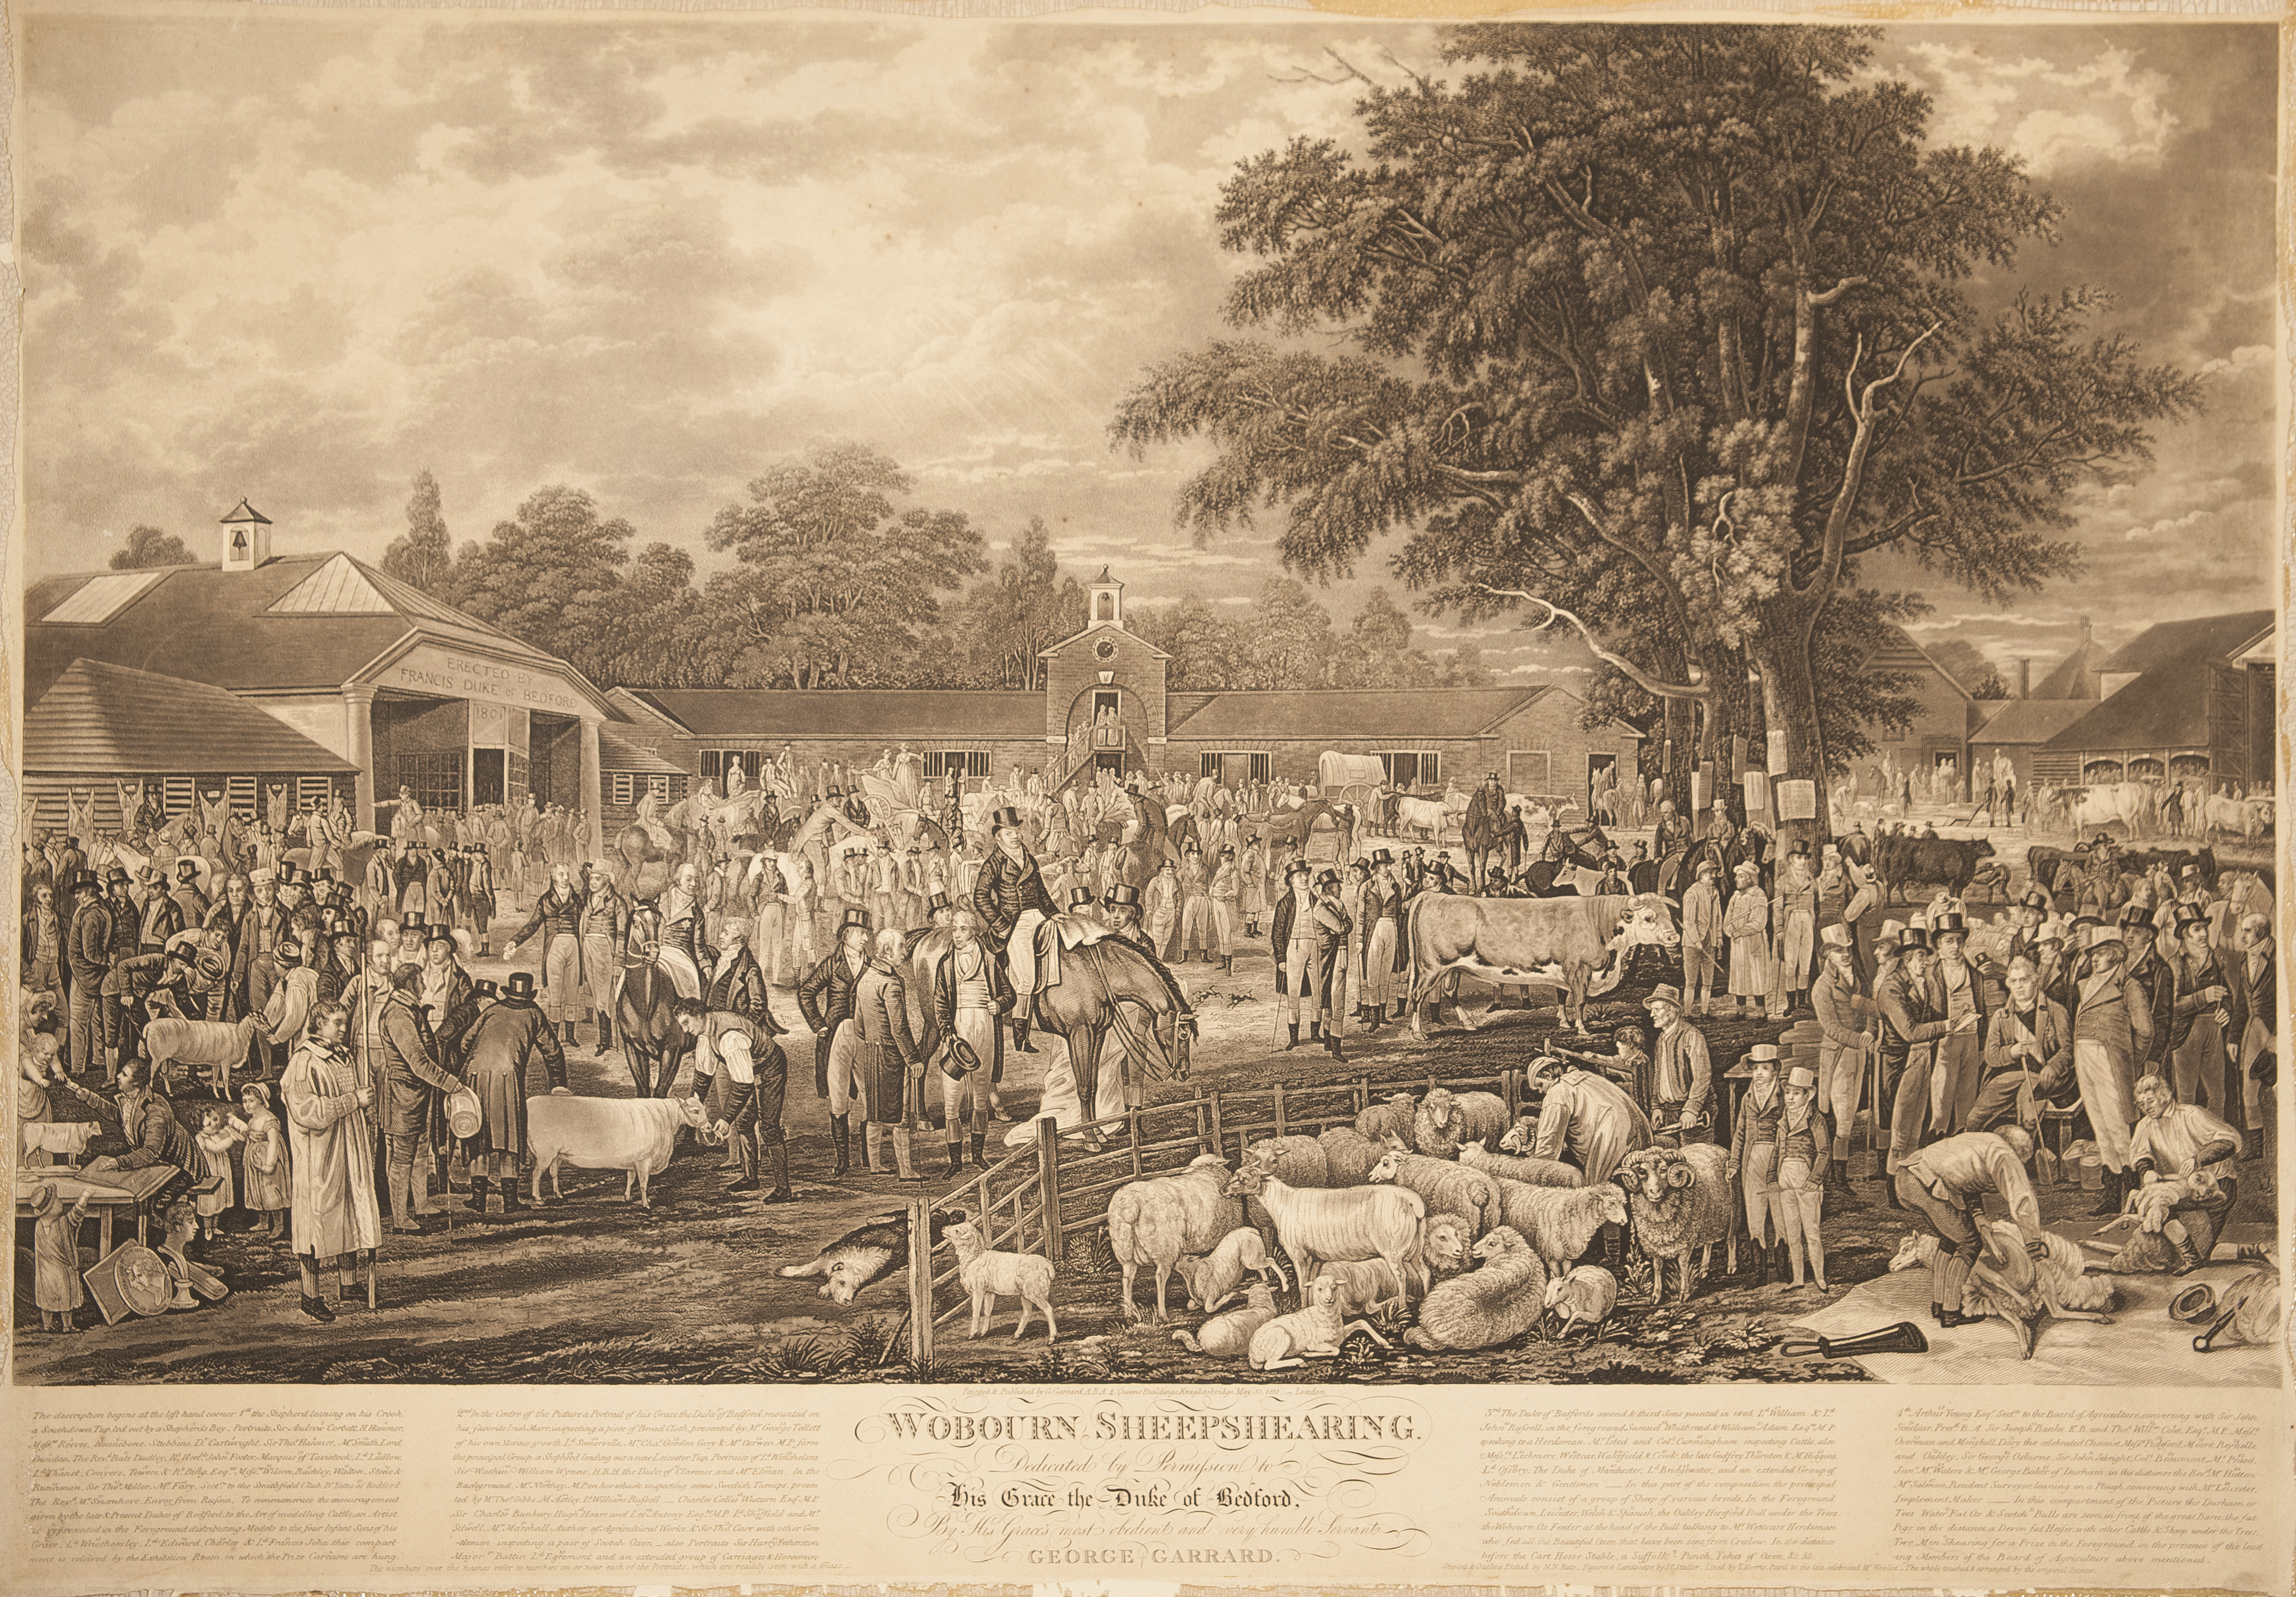 Print after a painting by George Garrard of Woburn Sheep Shearing. Print dates to 1811 and depicts peopel and animals at an early agricultural show.